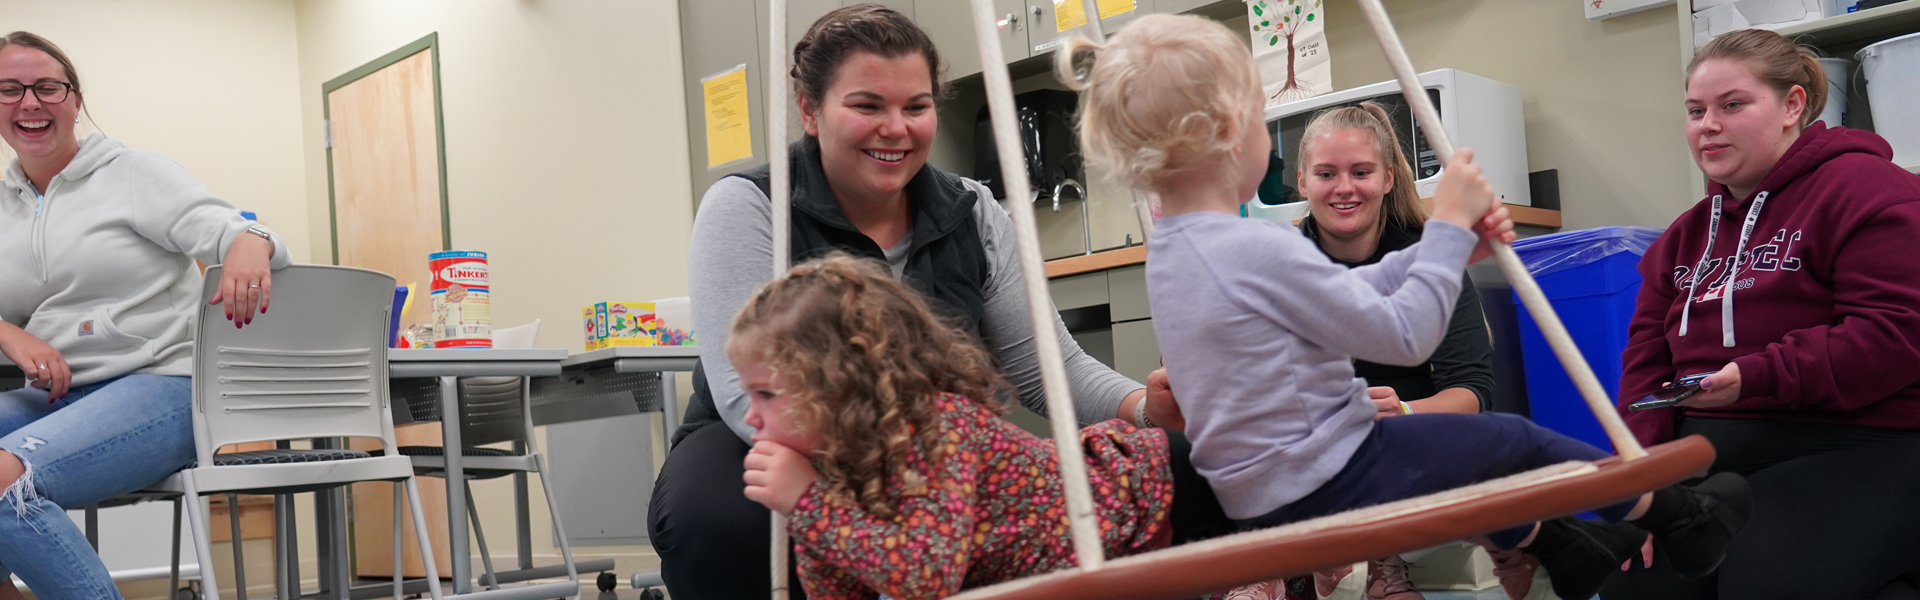 Occupational Therapy students work with children in a classroom setting